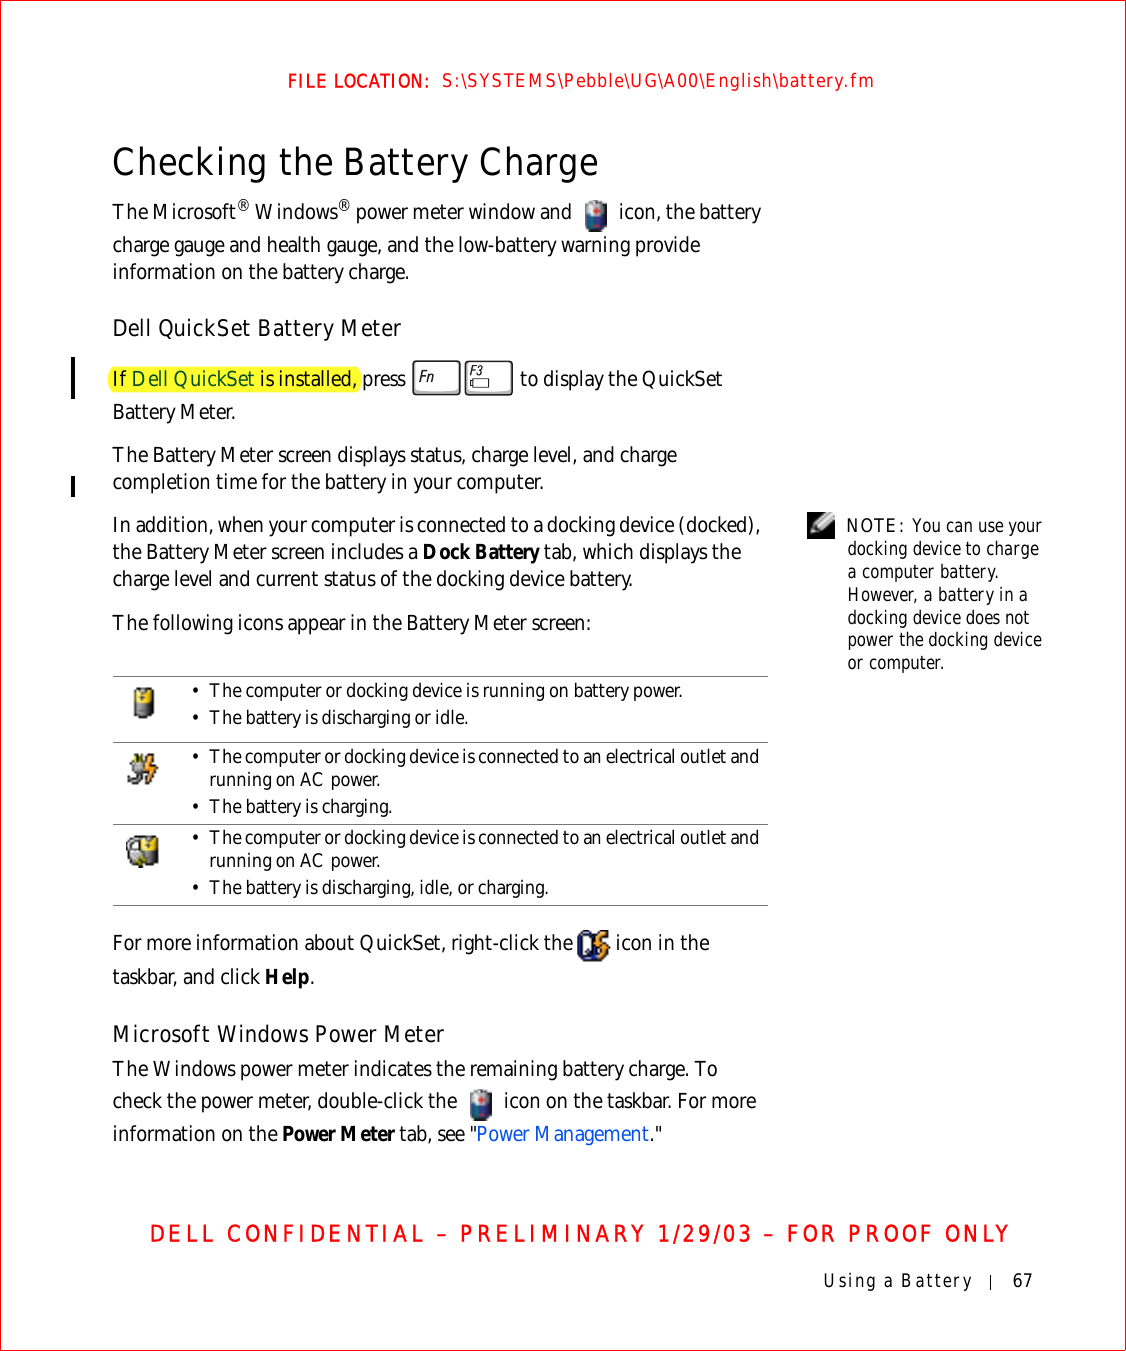 Using a Battery 67FILE LOCATION:  S:\SYSTEMS\Pebble\UG\A00\English\battery.fmDELL CONFIDENTIAL – PRELIMINARY 1/29/03 – FOR PROOF ONLYChecking the Battery ChargeThe Microsoft® Windows® power meter window and   icon, the battery charge gauge and health gauge, and the low-battery warning provide information on the battery charge.Dell QuickSet Battery MeterIf Dell QuickSet is installed, press   to display the QuickSet Battery Meter.The Battery Meter screen displays status, charge level, and charge completion time for the battery in your computer. NOTE: You can use your docking device to charge a computer battery. However, a battery in a docking device does not power the docking device or computer.In addition, when your computer is connected to a docking device (docked), the Battery Meter screen includes a Dock Battery tab, which displays the charge level and current status of the docking device battery.The following icons appear in the Battery Meter screen:For more information about QuickSet, right-click the   icon in the taskbar, and click Help.Microsoft Windows Power MeterThe Windows power meter indicates the remaining battery charge. To check the power meter, double-click the   icon on the taskbar. For more information on the Power Meter tab, see &quot;Power Management.&quot;• The computer or docking device is running on battery power.• The battery is discharging or idle.• The computer or docking device is connected to an electrical outlet and running on AC power.• The battery is charging.• The computer or docking device is connected to an electrical outlet and running on AC power.• The battery is discharging, idle, or charging.